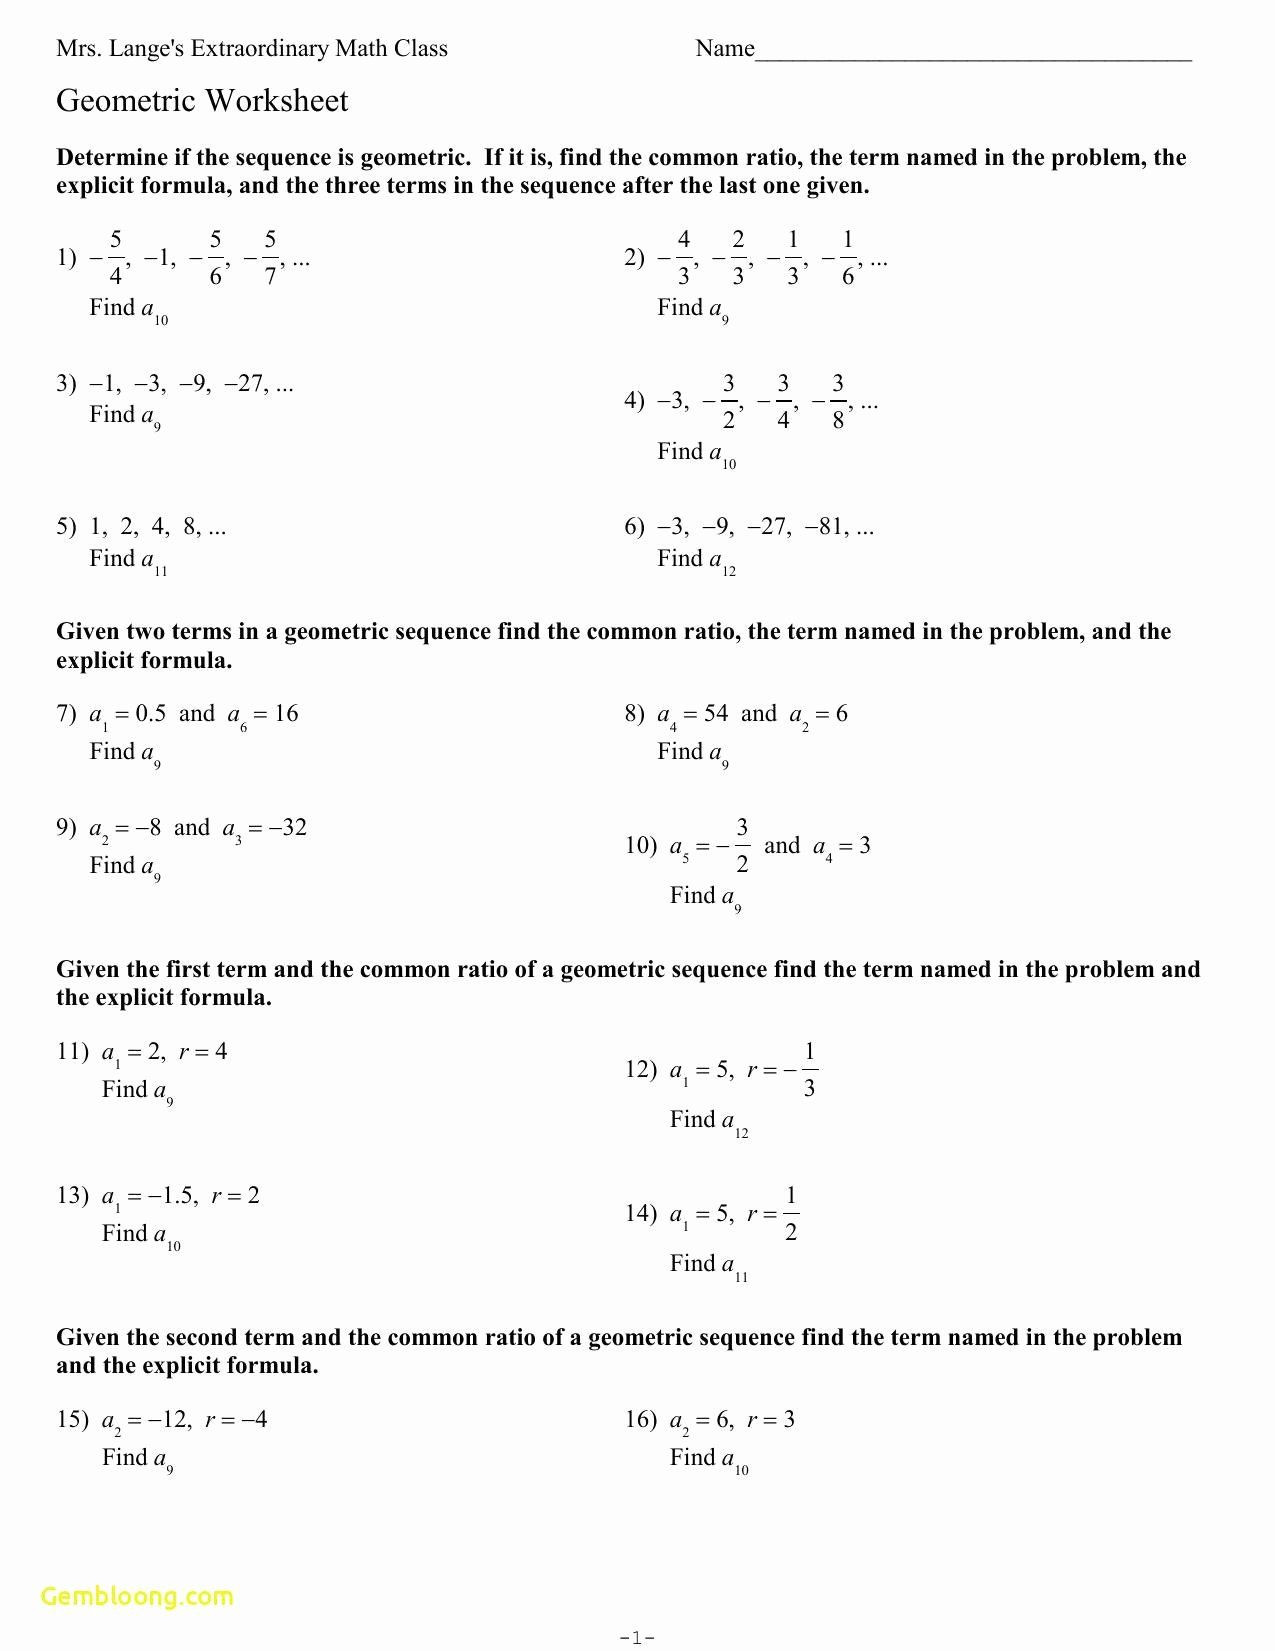 Geometric Sequences Worksheet Answers 50 Arithmetic Sequence Worksheet Answers In 2020 with